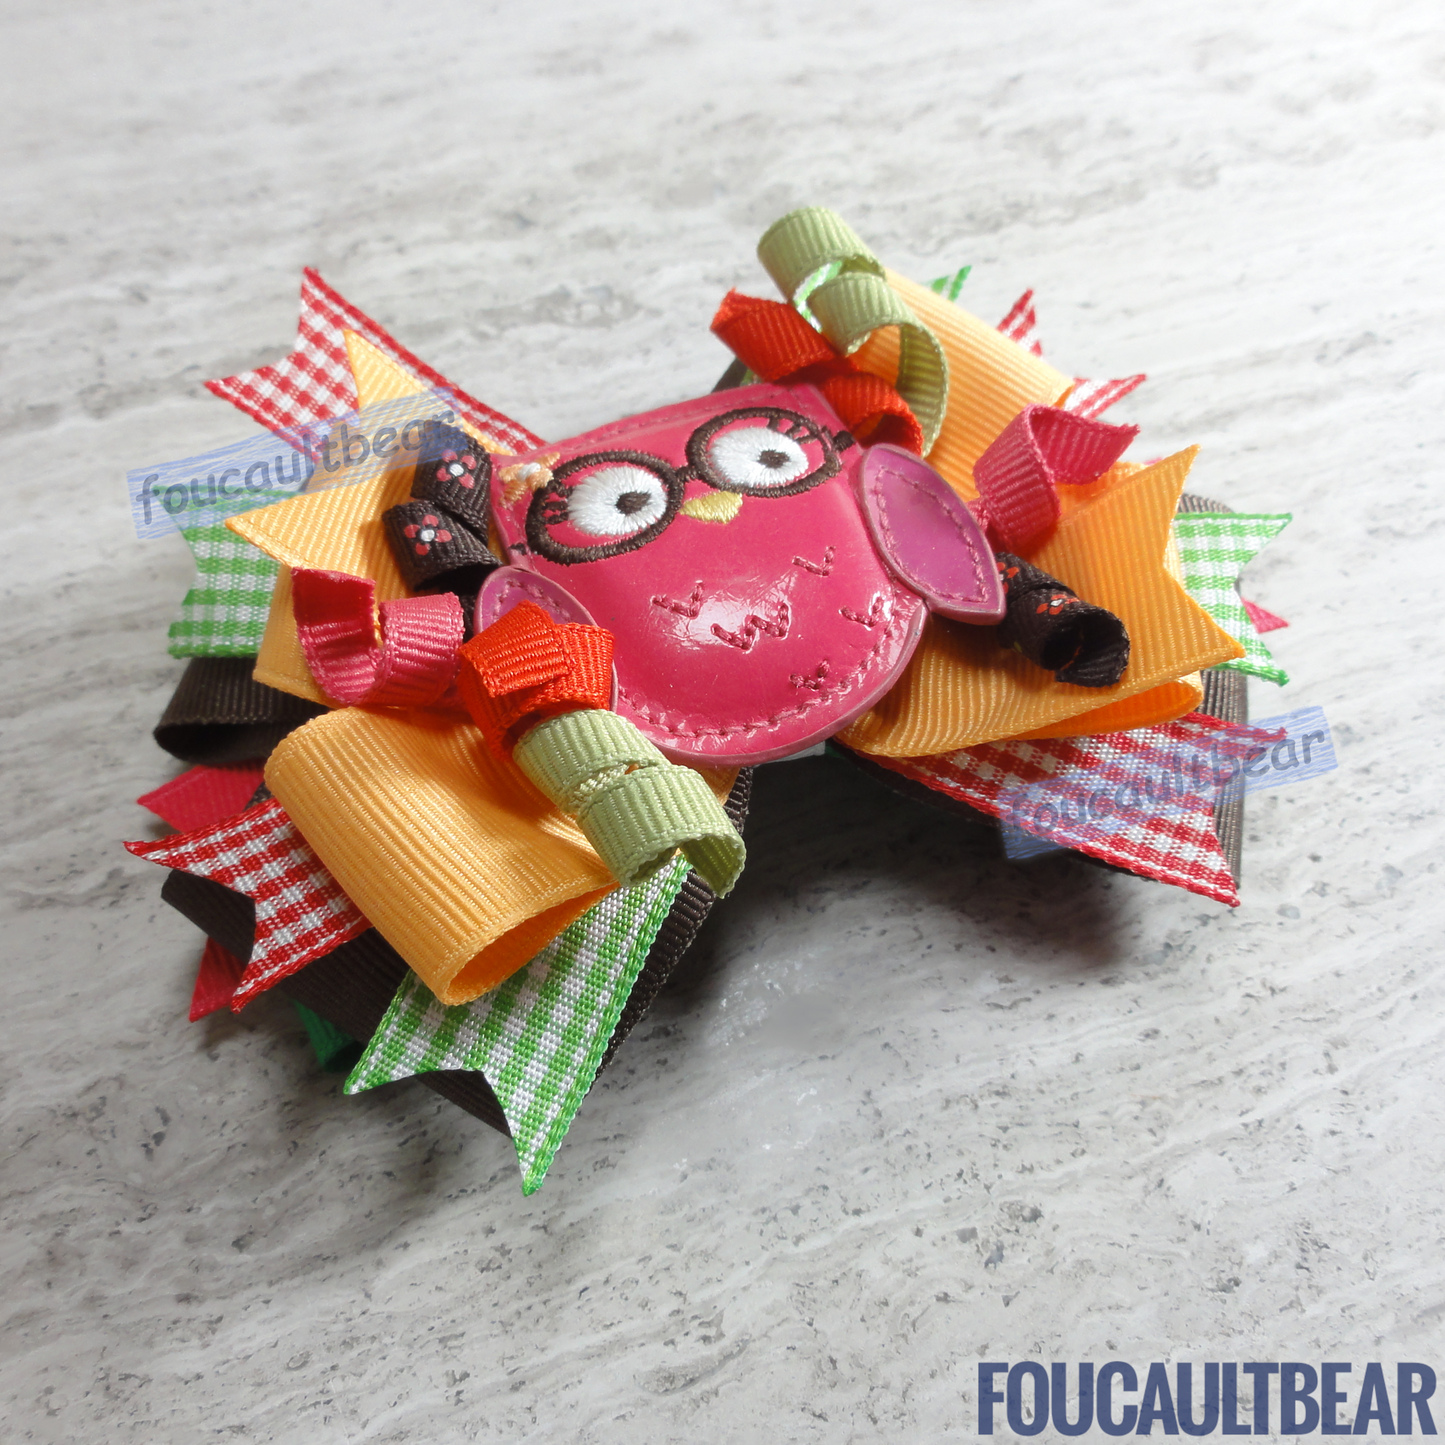 Foucaultbear's HANDMADE MULTI-LAYERED HAIR BOW CLIP with CENTERPIECE. Large Fall Homecoming Brainy Owl with Glasses. Soft Patent Centerpiece. Grosgrain Ribbon Bow. French Barrette Hair Clip For Ponytail or Pigtails. M2MG. Adorable Soft Big Bespectacled Owl is perfect for toddlers, preschoolers, kindergartners, elementary or even middle-schoolers for the coming Autumn and Thanksgiving. Can be worn year round too for owl lovers! Very versatile in my opinion. 